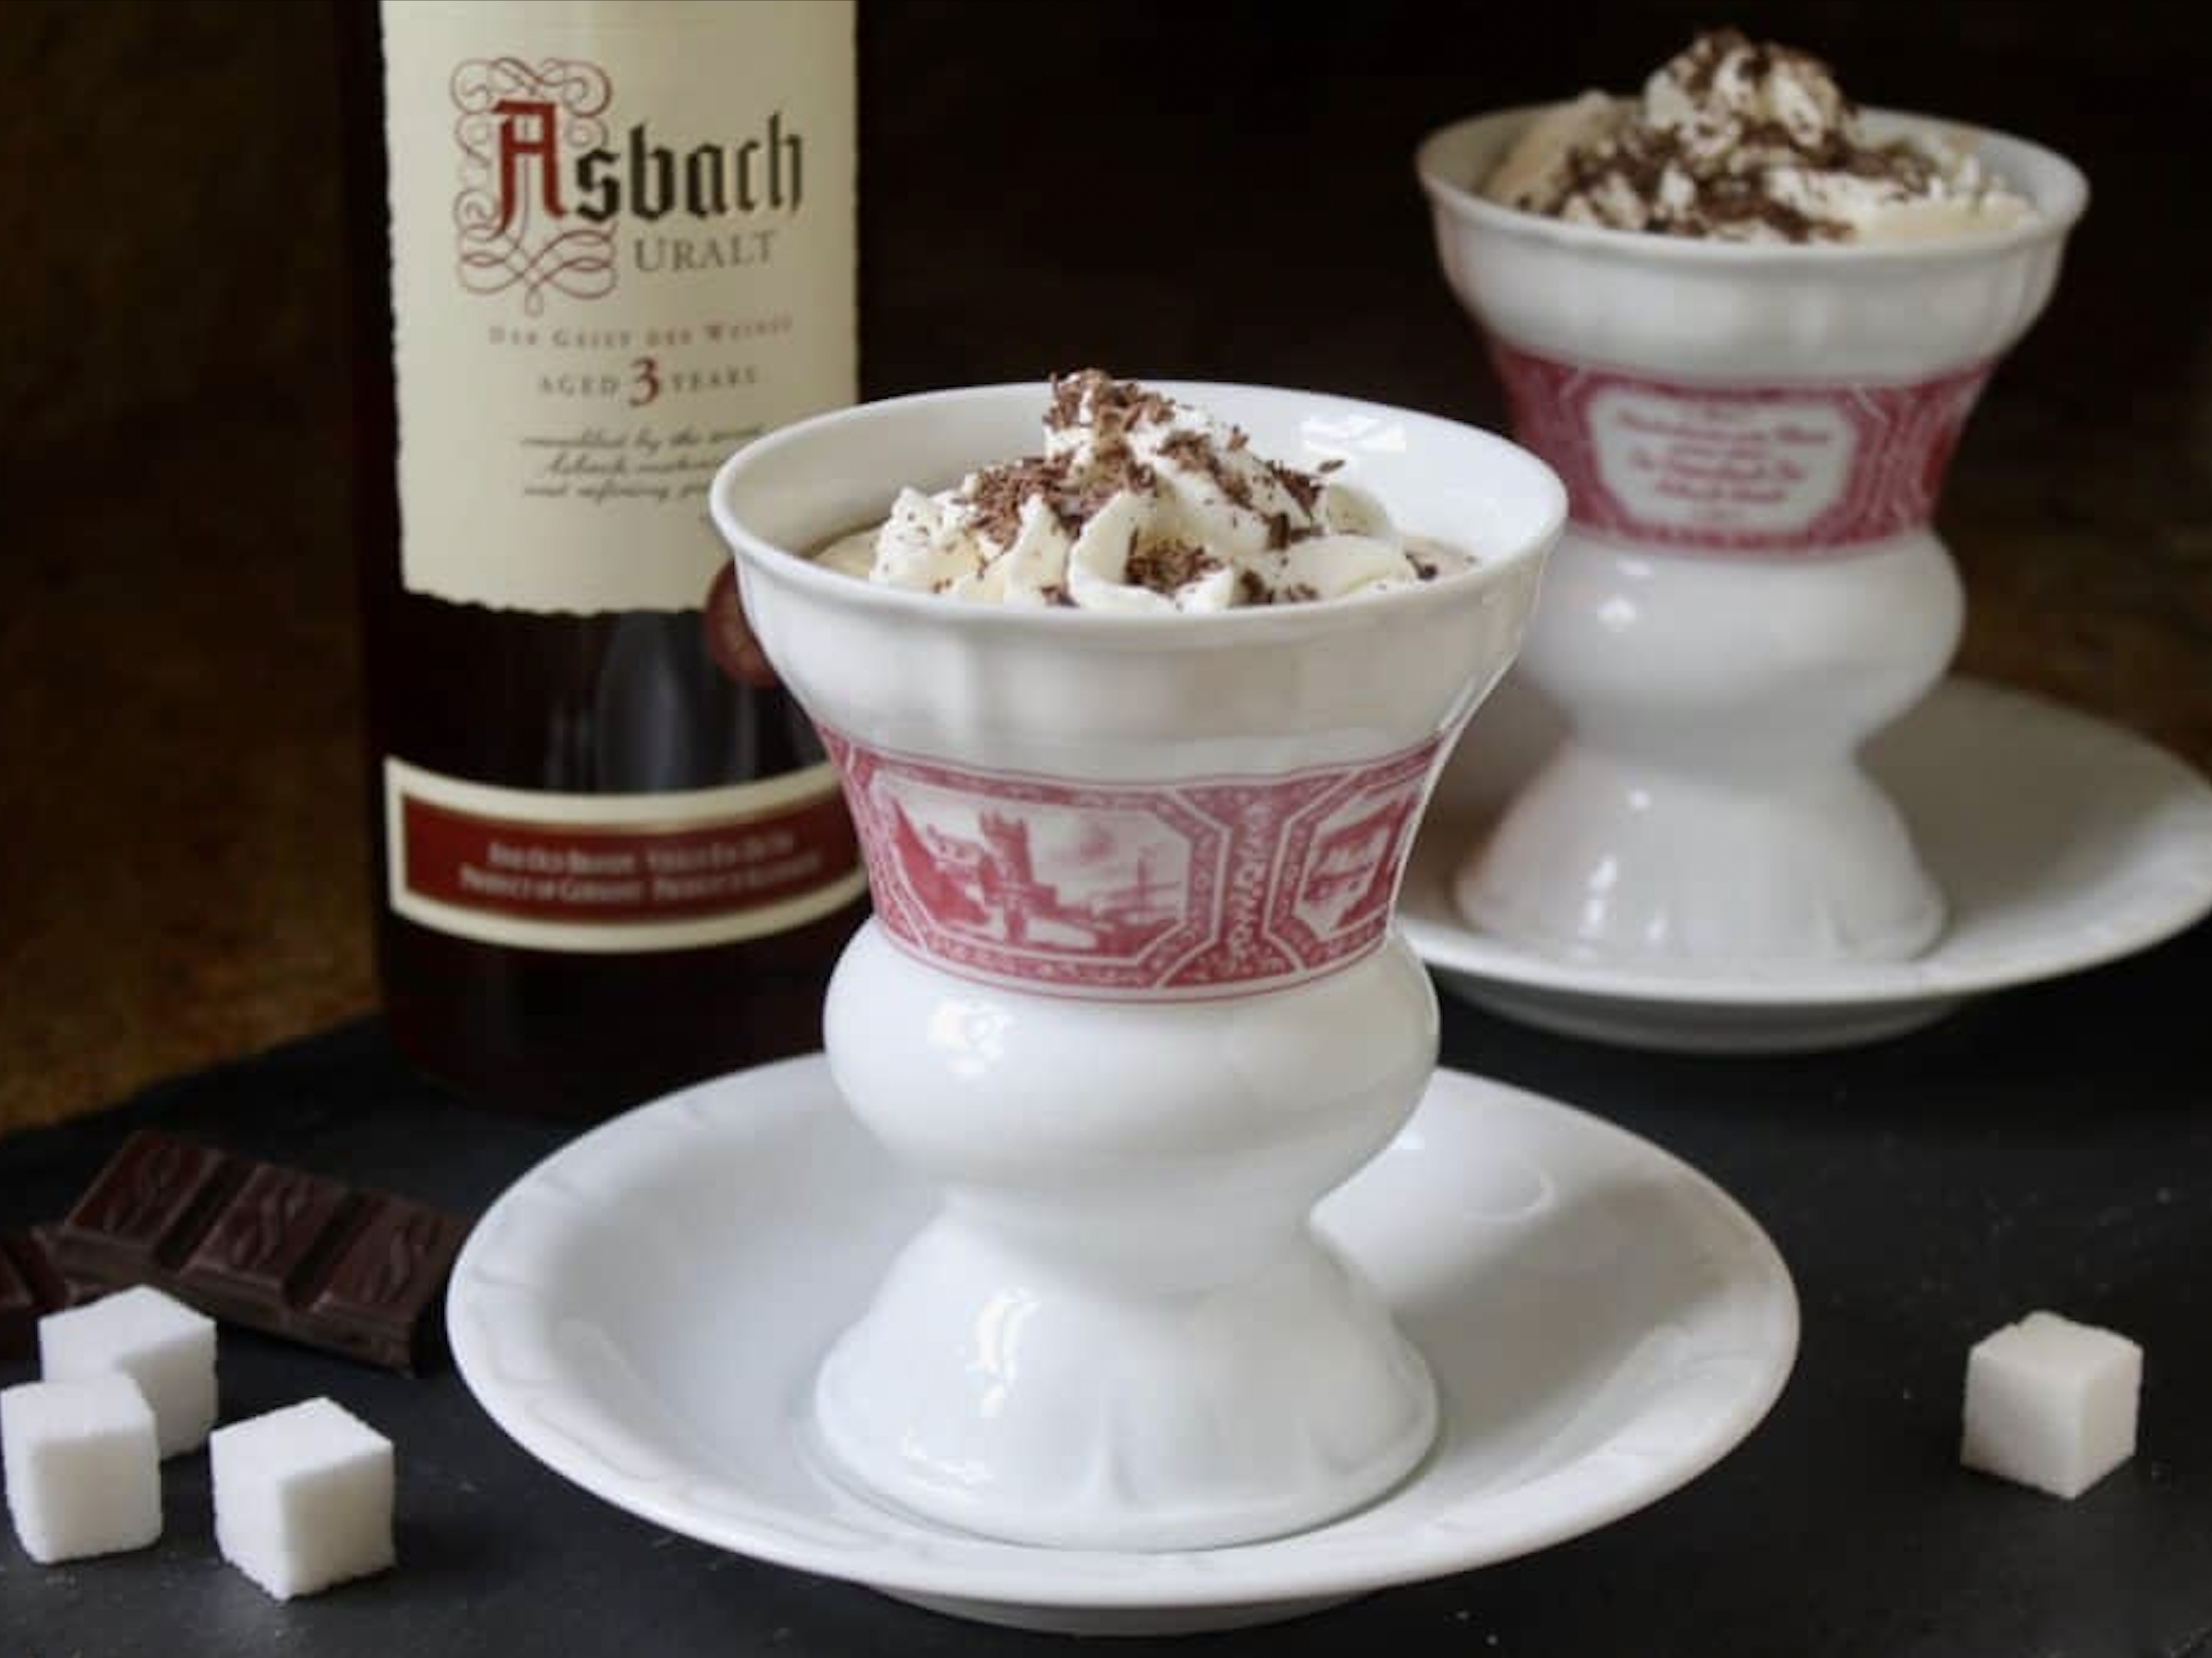 This delicious German coffee has a splash of alcohol and is great for an end-of-the-day treat.<p><b><a href="https://www.christinascucina.com/how-to-make-an-authentic-rudesheimer-coffee-with-asbach-brandy-and-cream/">Get recipe</a></b></p>